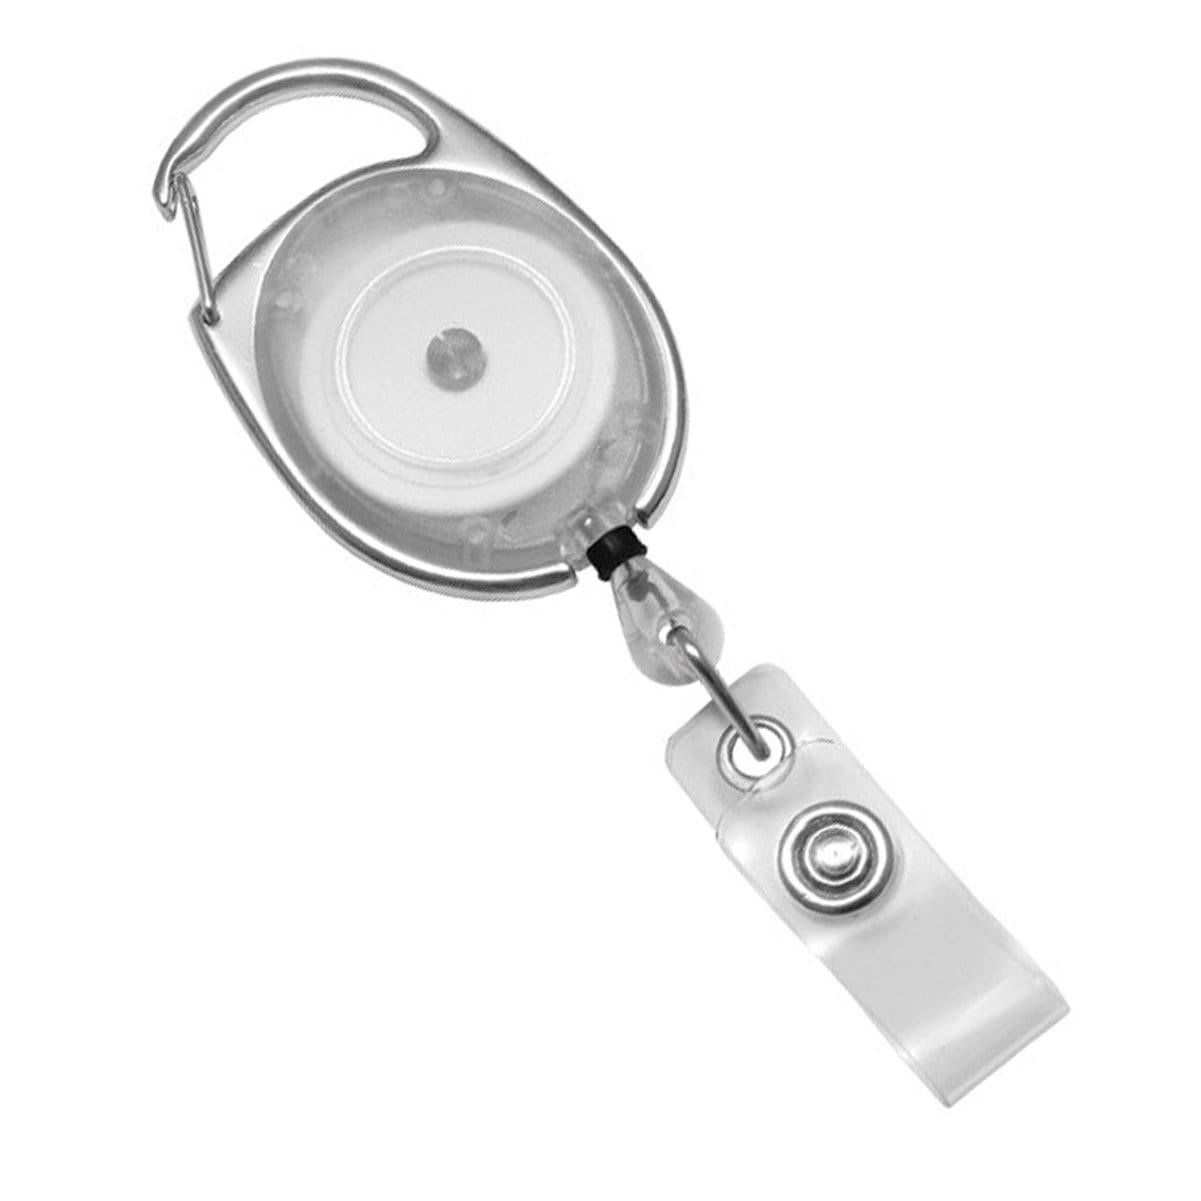 Translucent White (clear) Carabiner Badge Reels (2120-70XX) 2120-7050